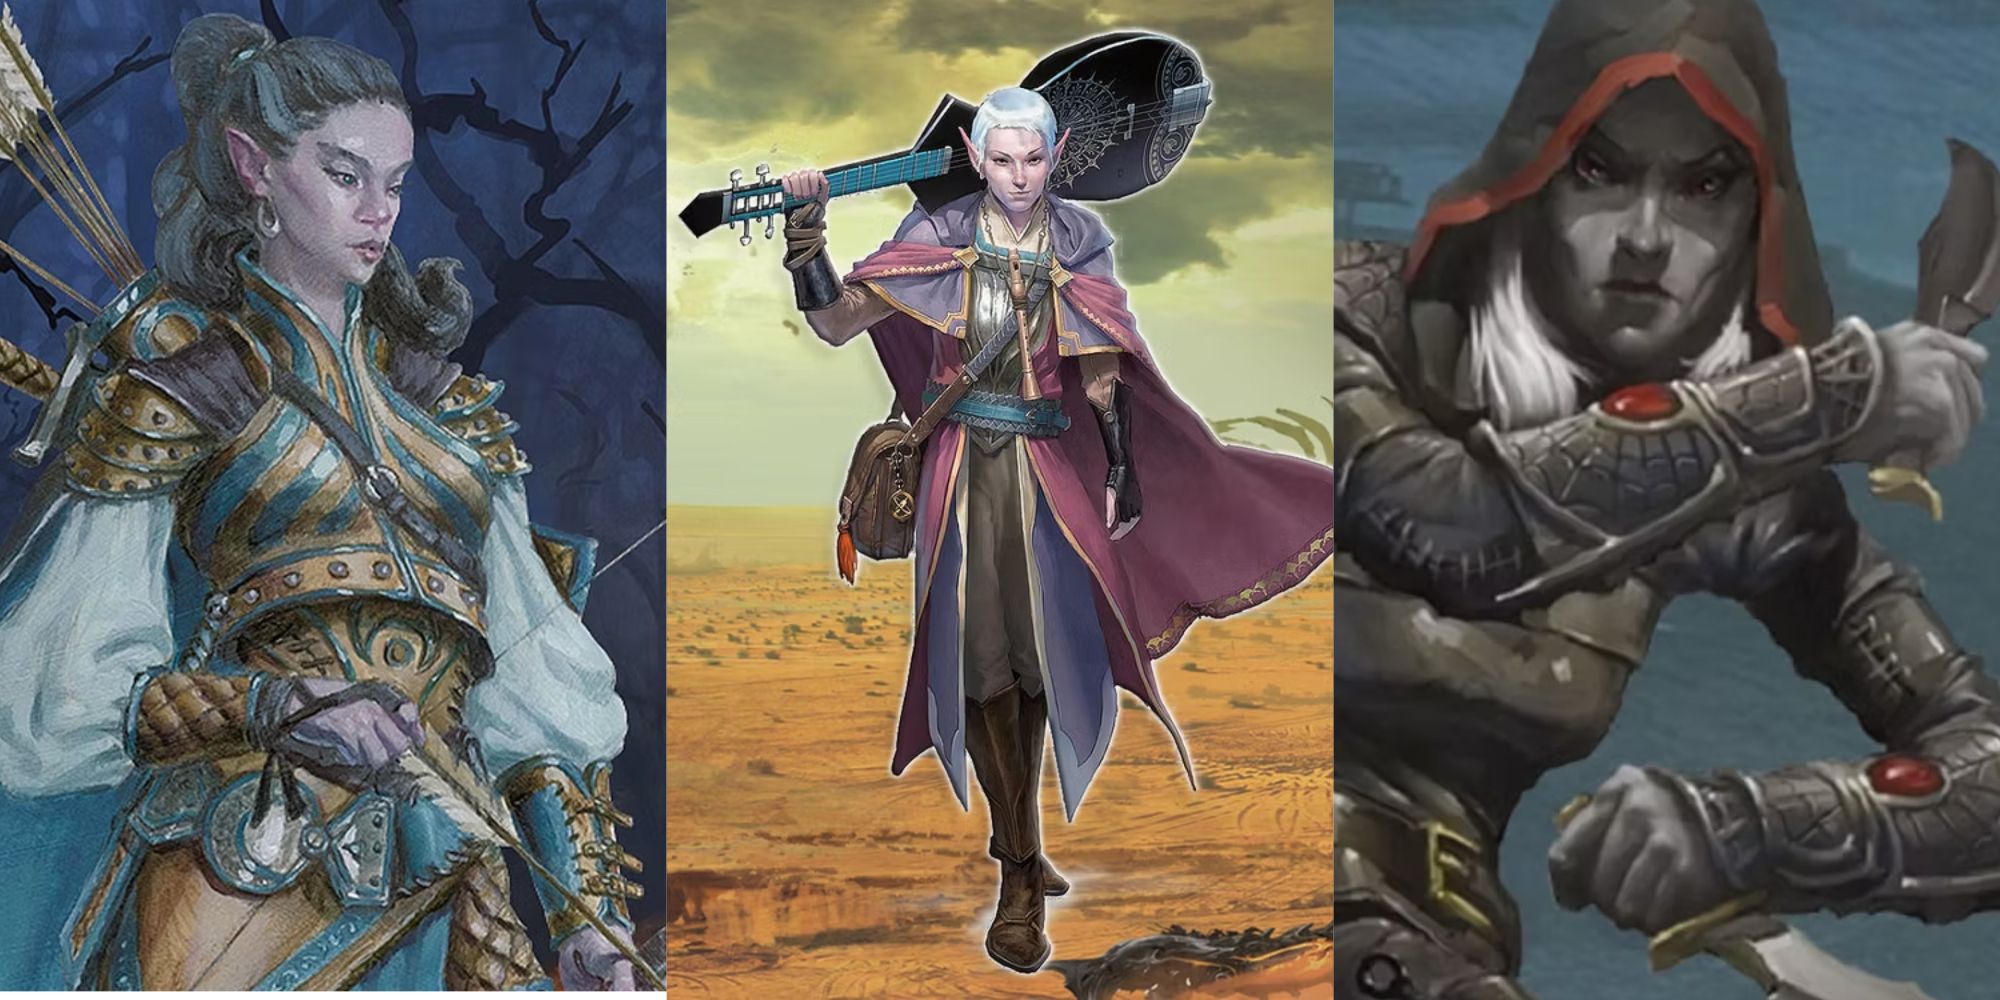 A split image of Dungeons & Dragons character art.